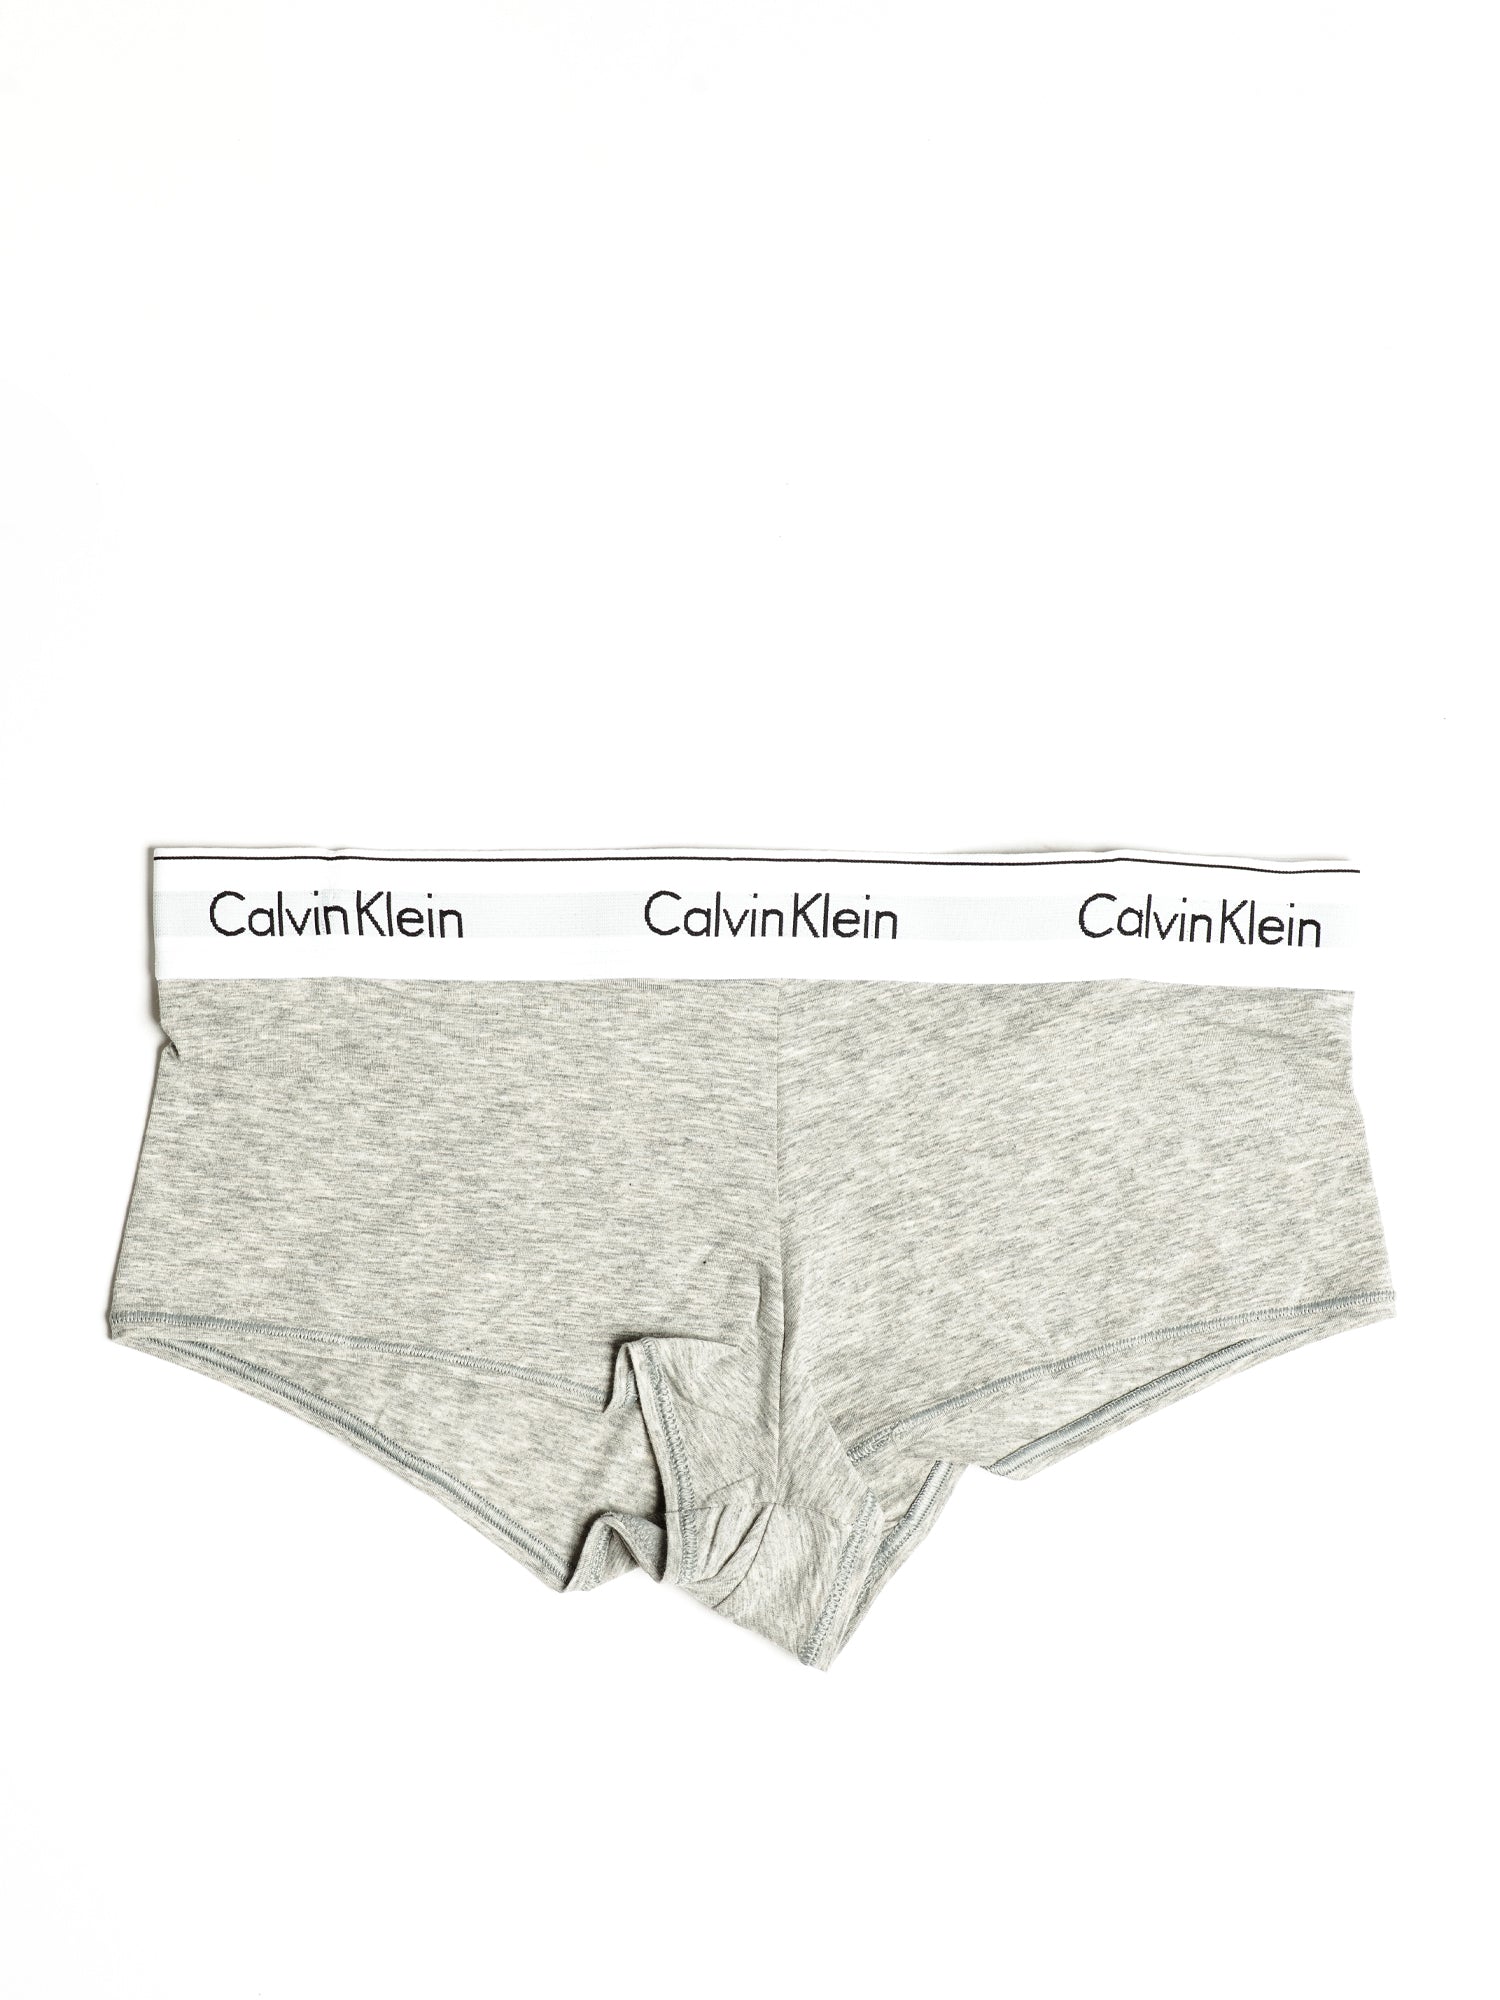 Calvin Klein - The Best Selection in Canada - Shop Now